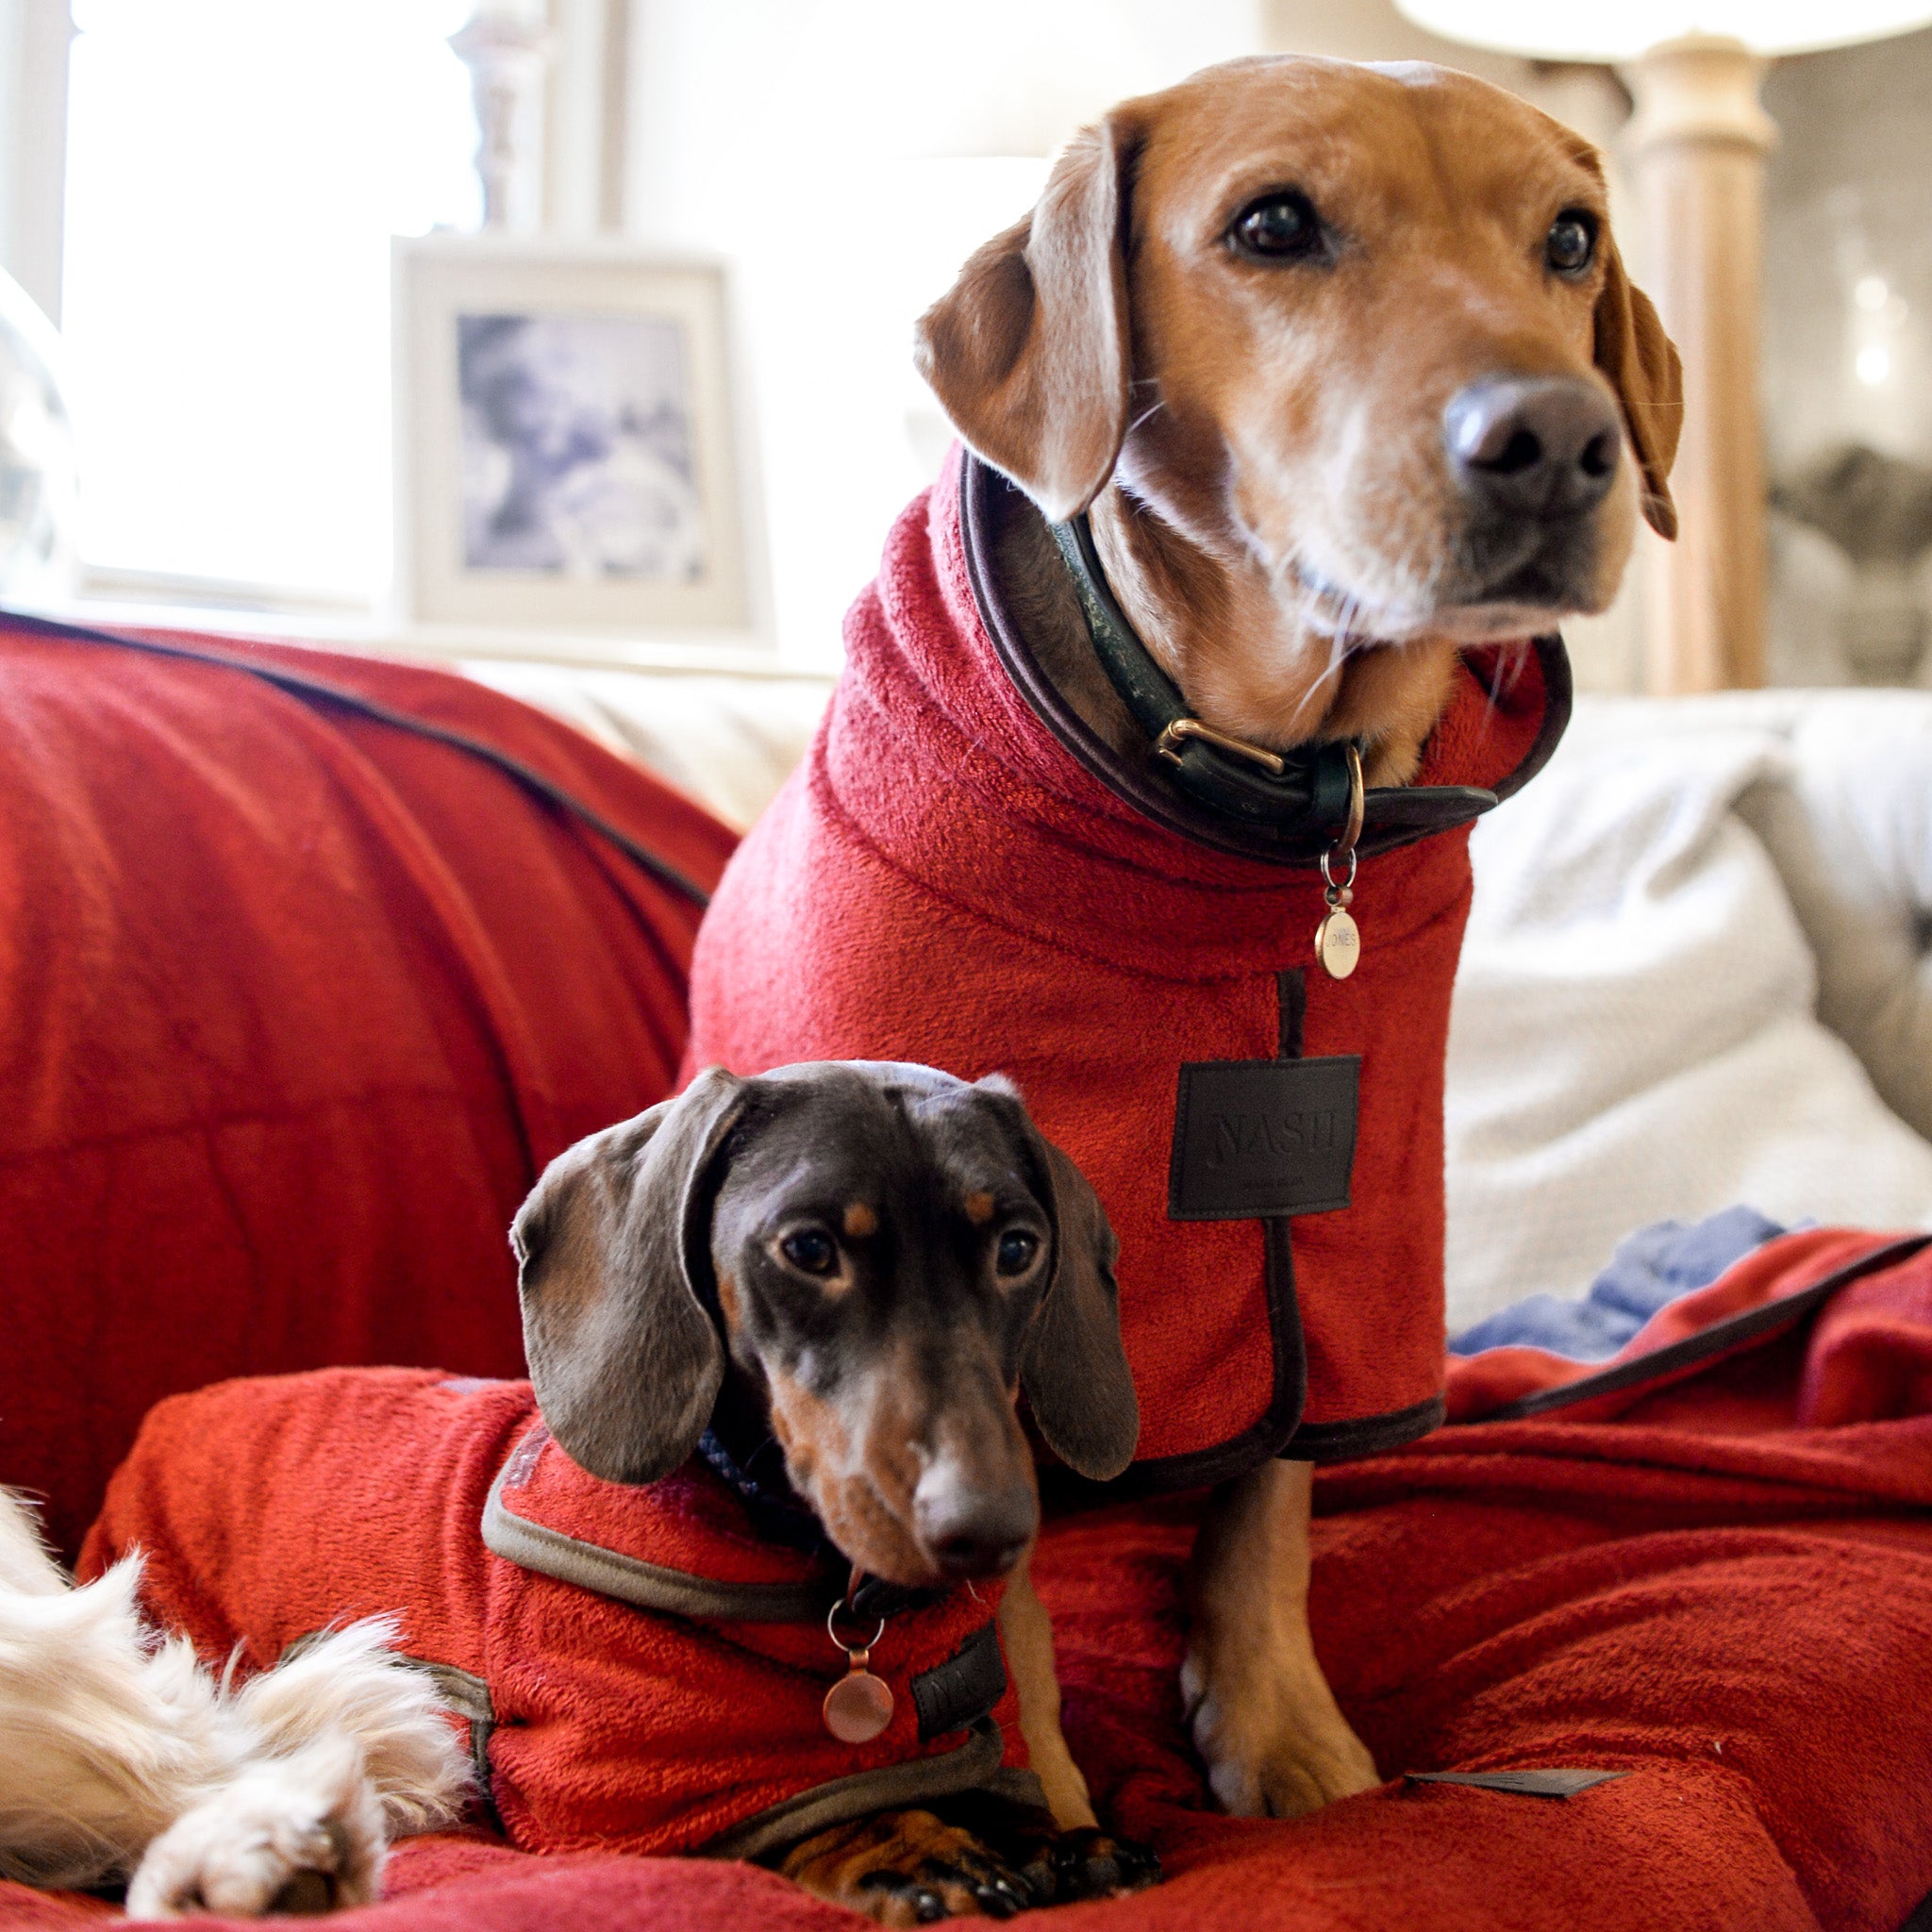 A Labrador & Daschund wearing matching red NASH dog drying coats, relaxing on a sofa with a red NASH dog throw.